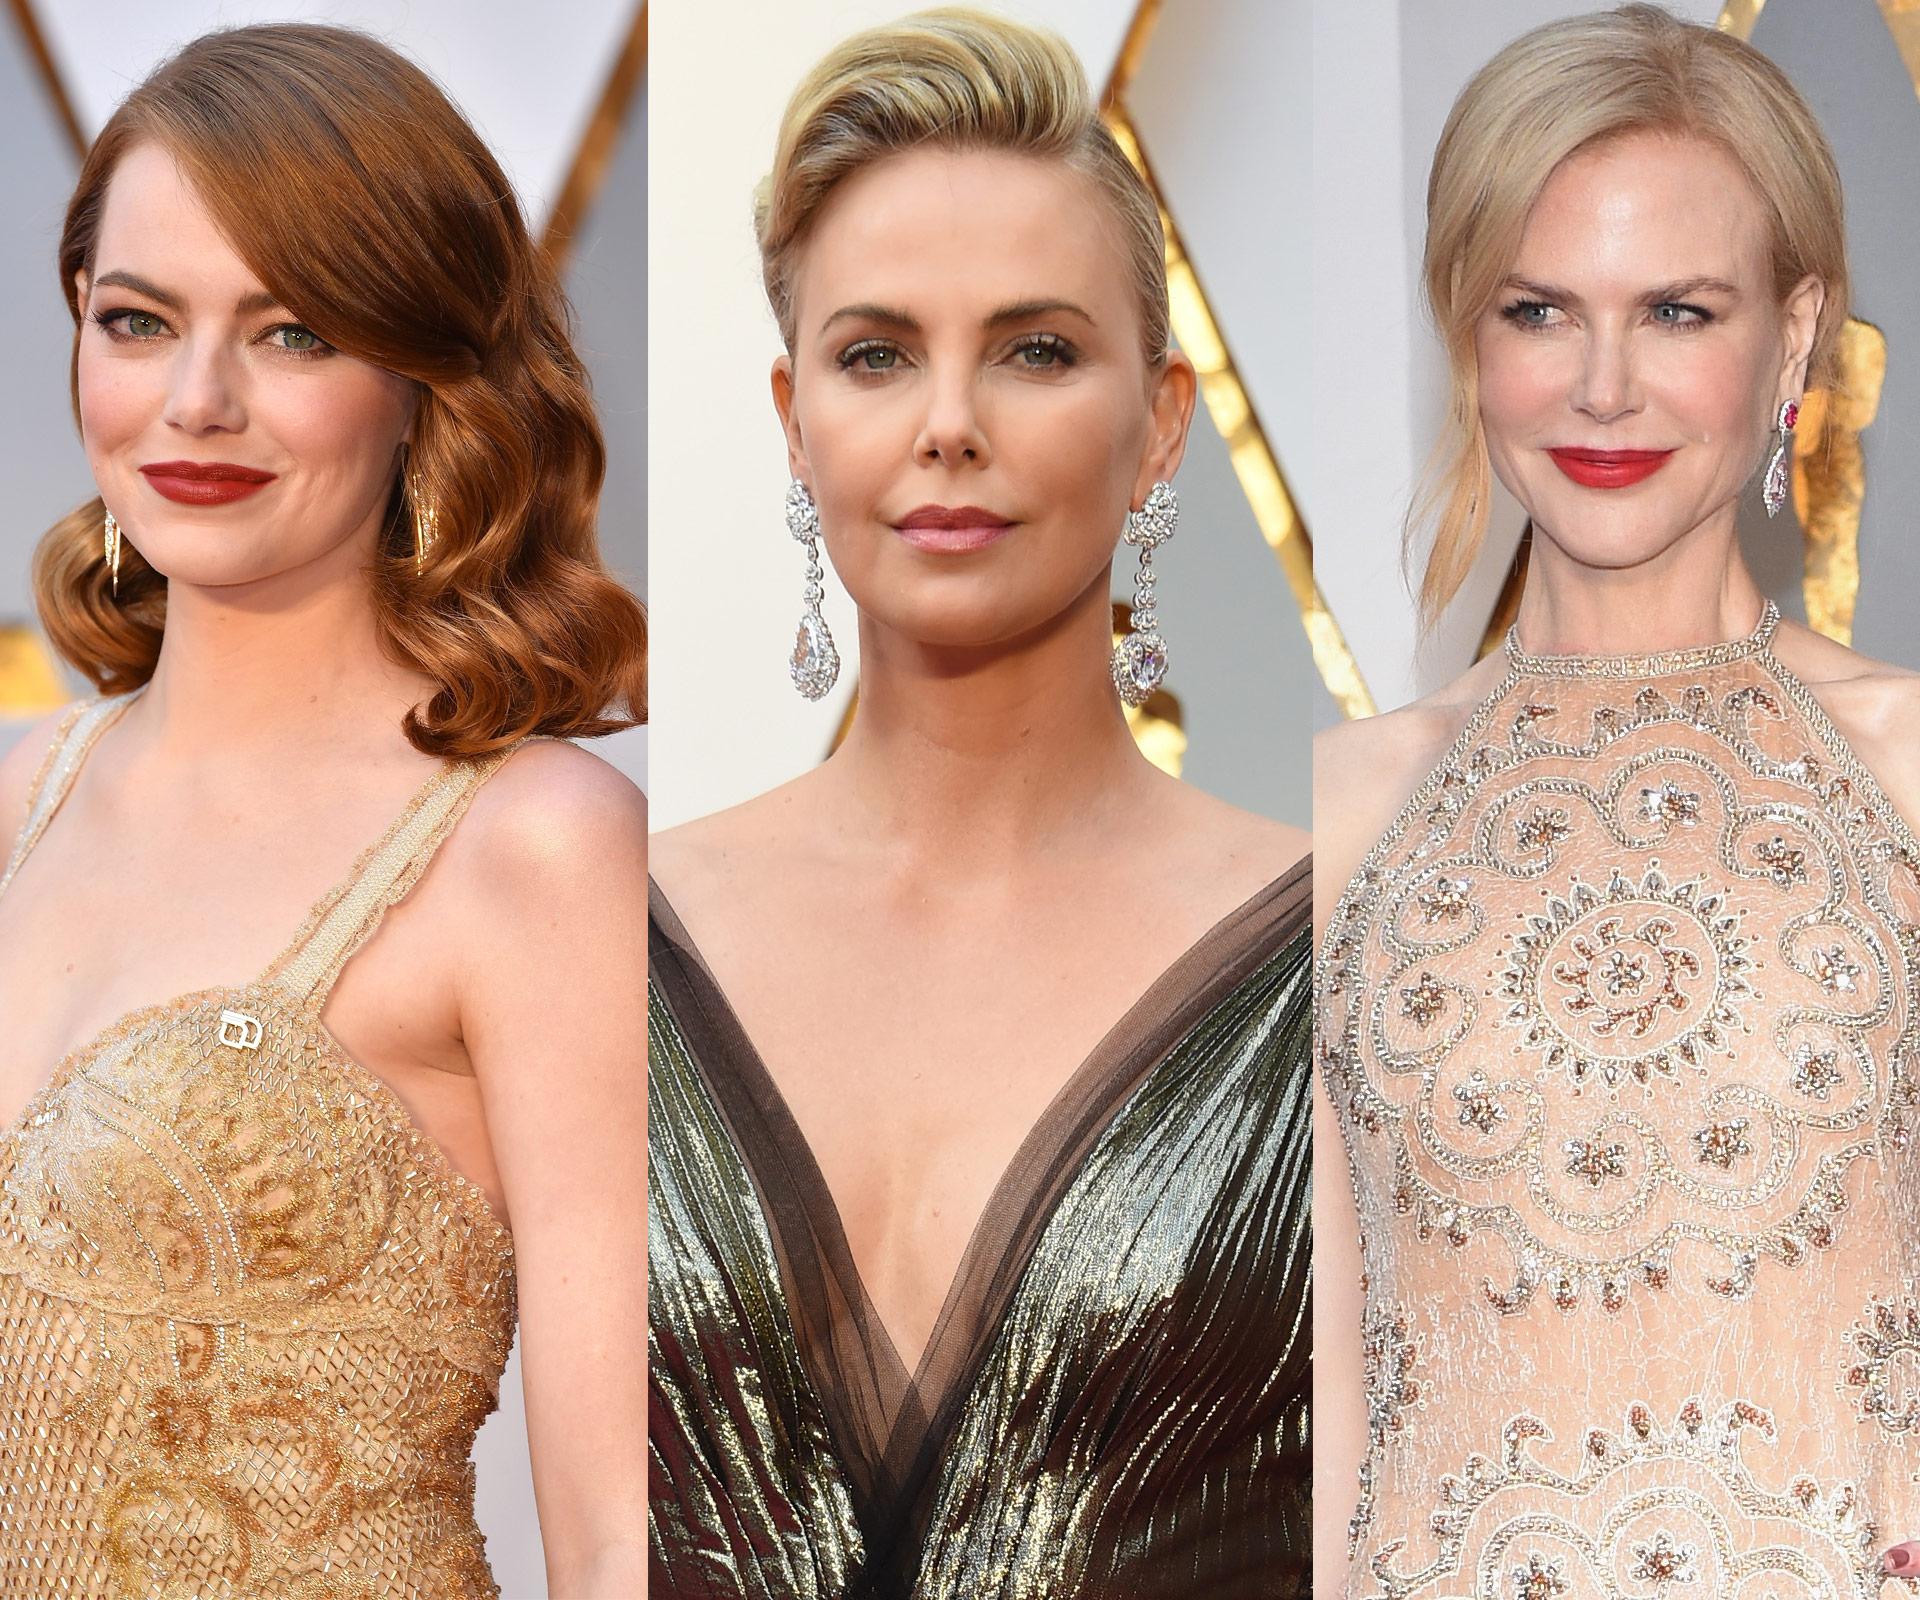 The best looks from the 2017 Oscars red carpet